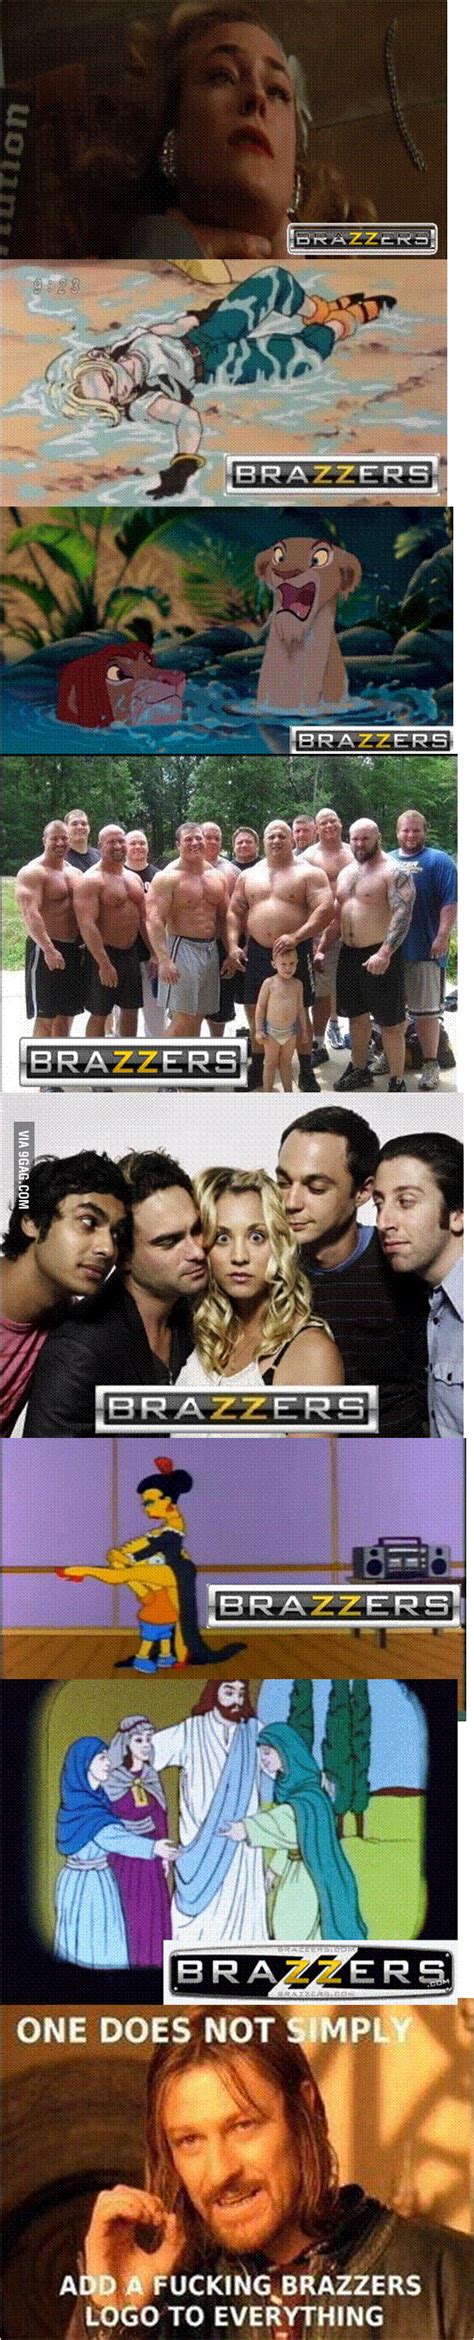 Seafood is a favorite among many food lovers, and with so many delicious options, it can be hard to decide where to go for your next seafood meal. . Brazzers compilation